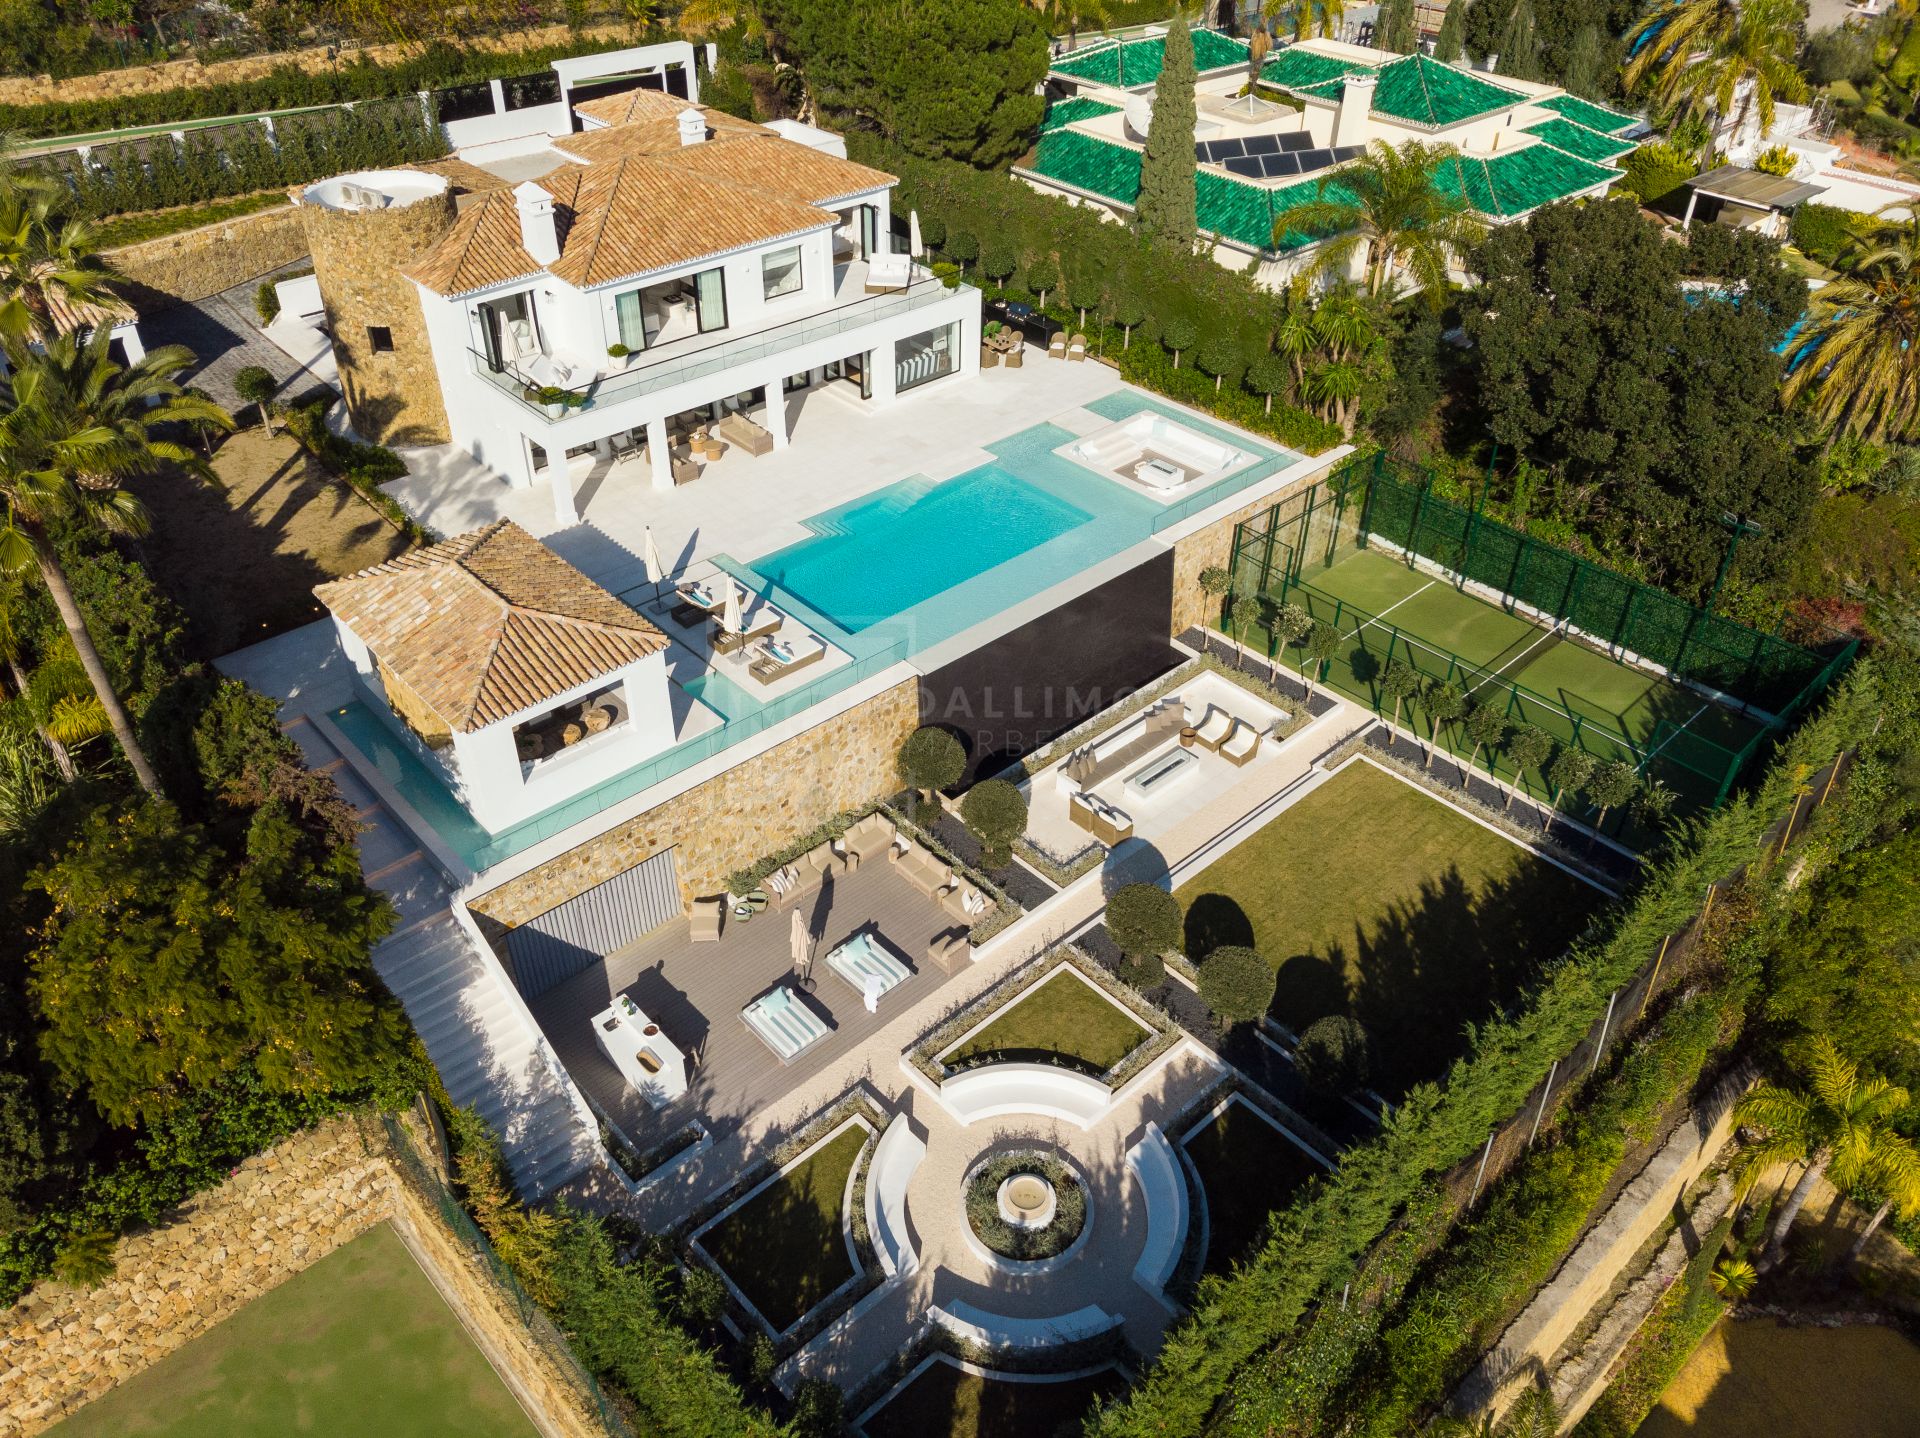 VILLA WITH PRIVATE TENNIS COURT LOCATED IN GATED COMMUNITY